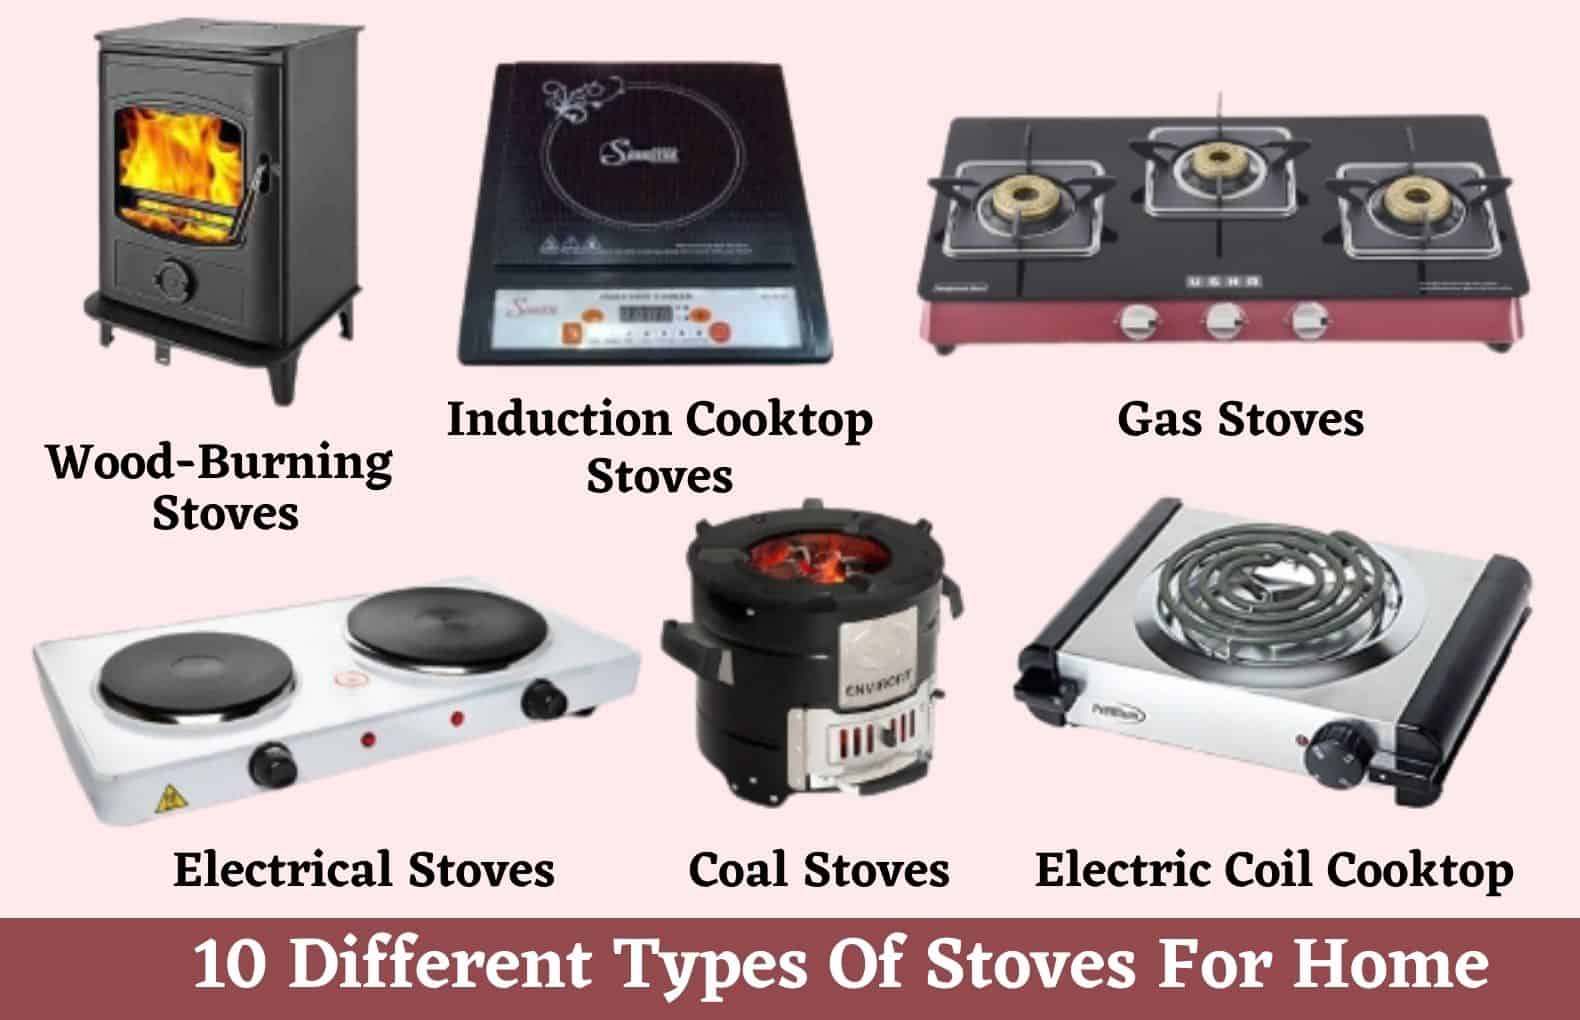 https://civiconcepts.com/wp-content/uploads/2022/05/10-Different-Types-Of-Stoves-For-Home.jpg